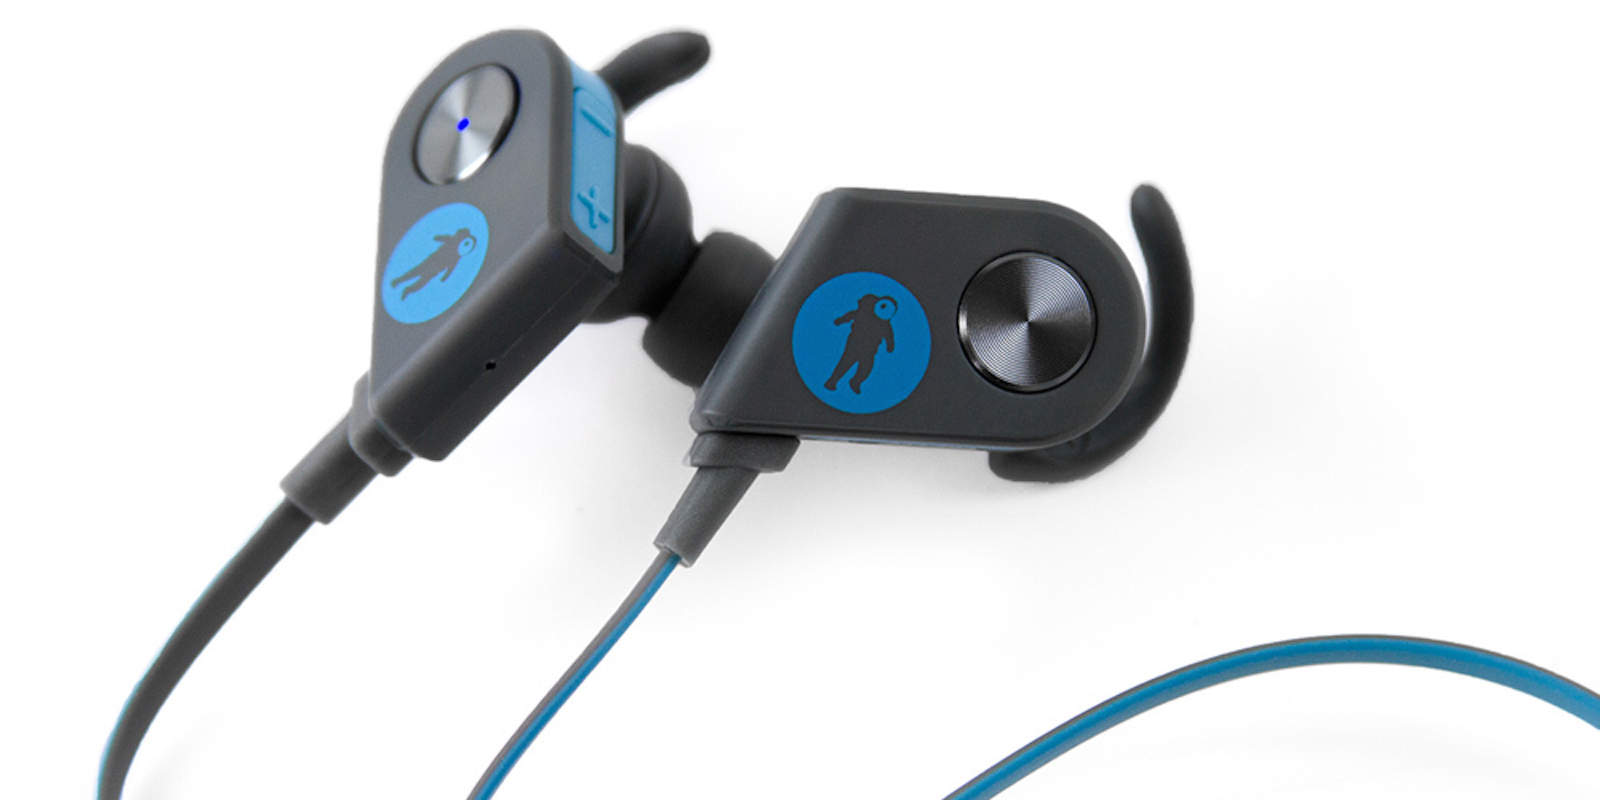 Weather-resistance and incredible sound quality make these earbuds a must-have.